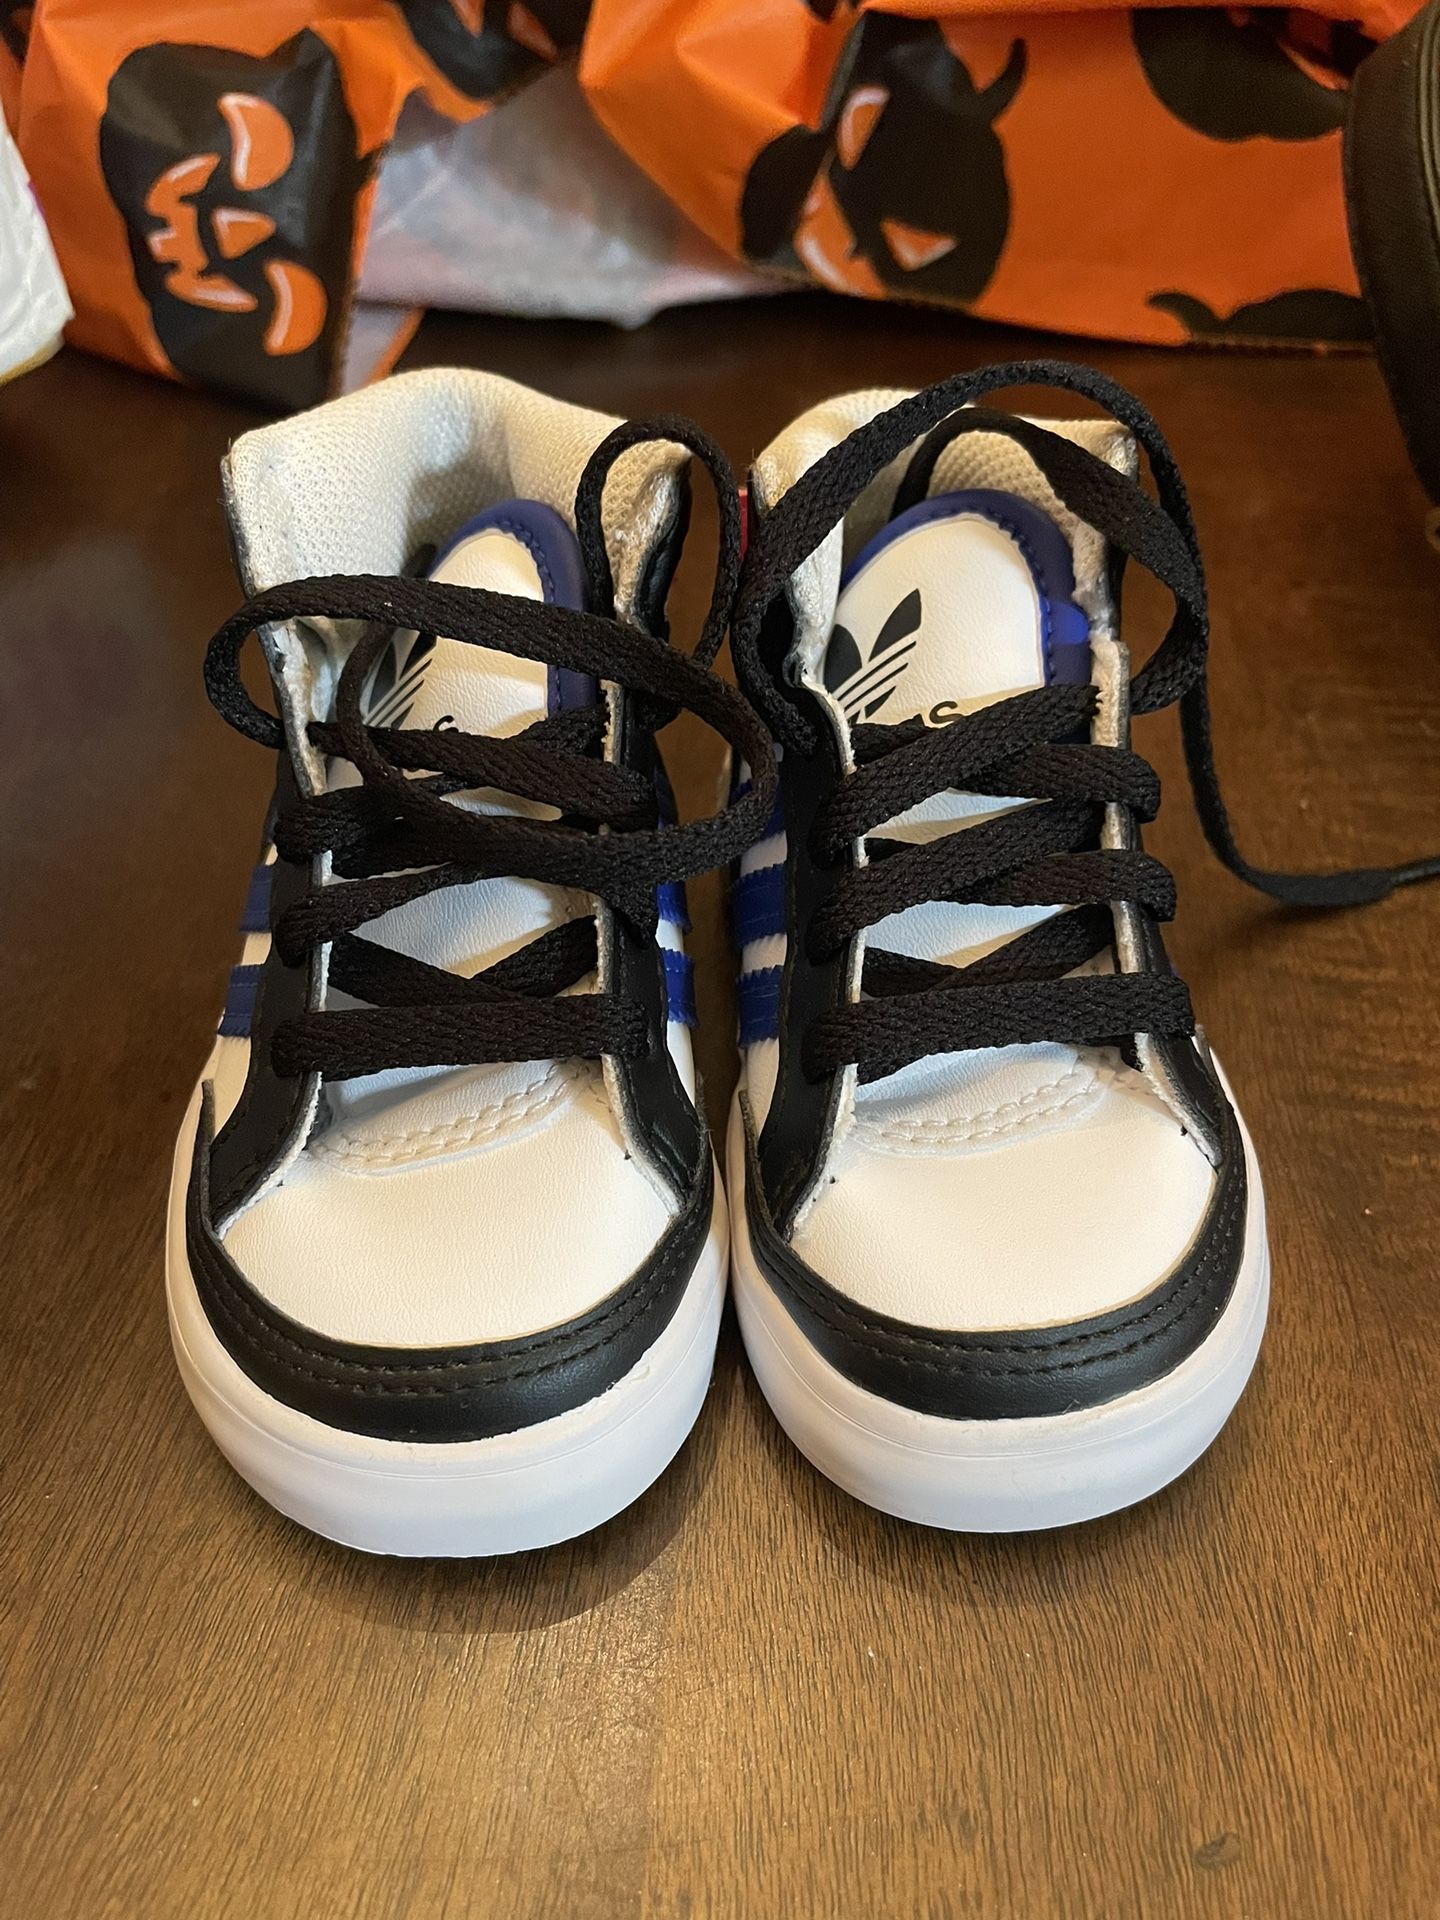 Adidas Baby Shoes Size 4c